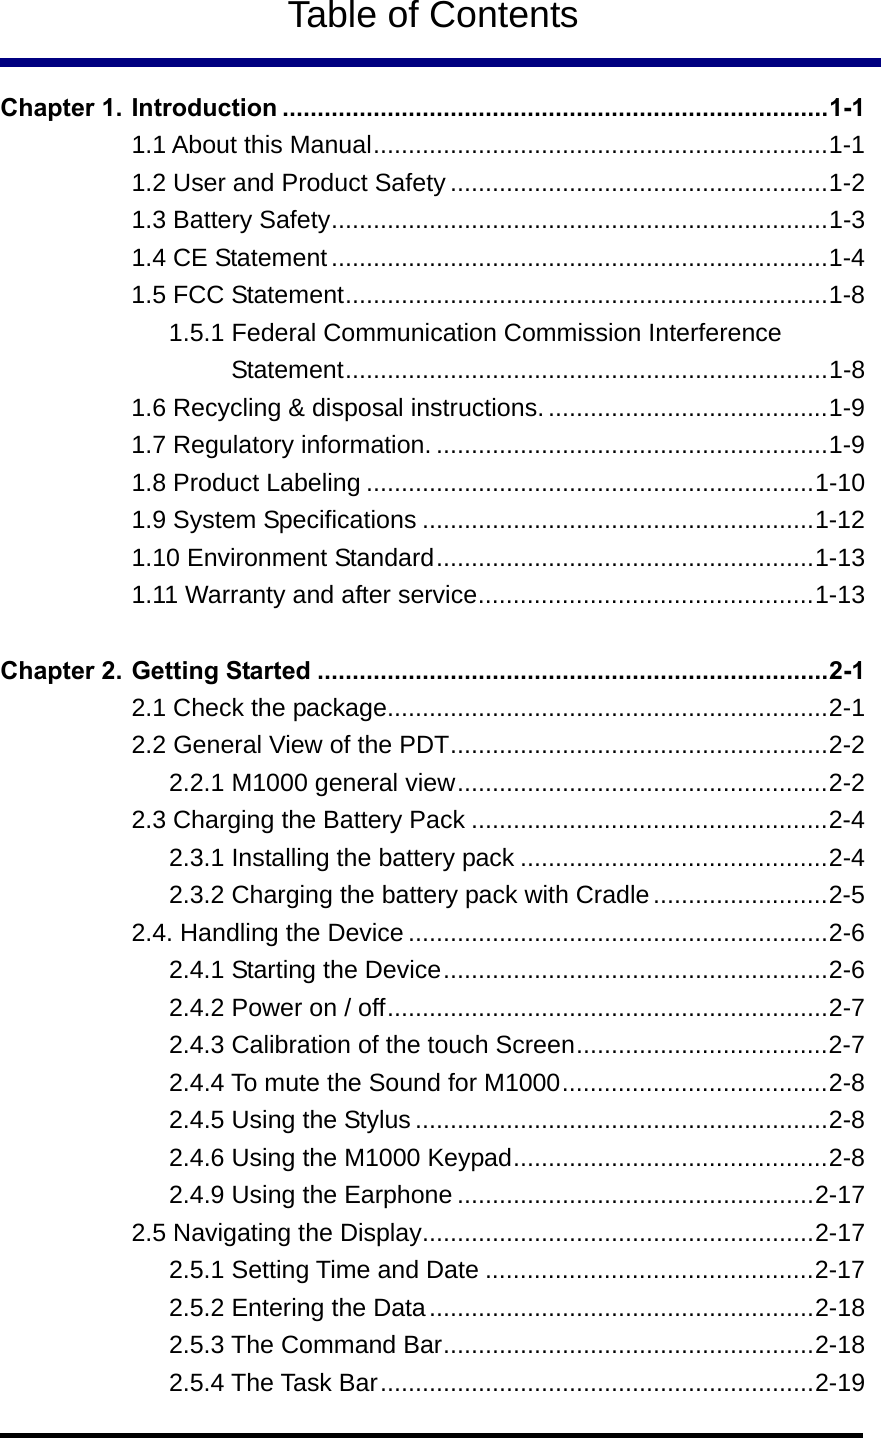   Table of Contents  Chapter 1. Introduction ..............................................................................1-1 1.1 About this Manual.................................................................1-1 1.2 User and Product Safety ......................................................1-2 1.3 Battery Safety.......................................................................1-3 1.4 CE Statement.......................................................................1-4 1.5 FCC Statement.....................................................................1-8 1.5.1 Federal Communication Commission Interference Statement.....................................................................1-8 1.6 Recycling &amp; disposal instructions. ........................................1-9 1.7 Regulatory information. ........................................................1-9 1.8 Product Labeling ................................................................1-10 1.9 System Specifications ........................................................1-12 1.10 Environment Standard......................................................1-13 1.11 Warranty and after service................................................1-13  Chapter 2. Getting Started .........................................................................2-1 2.1 Check the package...............................................................2-1 2.2 General View of the PDT......................................................2-2 2.2.1 M1000 general view.....................................................2-2 2.3 Charging the Battery Pack ...................................................2-4 2.3.1 Installing the battery pack ............................................2-4 2.3.2 Charging the battery pack with Cradle.........................2-5 2.4. Handling the Device ............................................................2-6 2.4.1 Starting the Device.......................................................2-6 2.4.2 Power on / off...............................................................2-7 2.4.3 Calibration of the touch Screen....................................2-7 2.4.4 To mute the Sound for M1000......................................2-8 2.4.5 Using the Stylus...........................................................2-8 2.4.6 Using the M1000 Keypad.............................................2-8 2.4.9 Using the Earphone ...................................................2-17 2.5 Navigating the Display........................................................2-17 2.5.1 Setting Time and Date ...............................................2-17 2.5.2 Entering the Data.......................................................2-18 2.5.3 The Command Bar.....................................................2-18 2.5.4 The Task Bar..............................................................2-19 